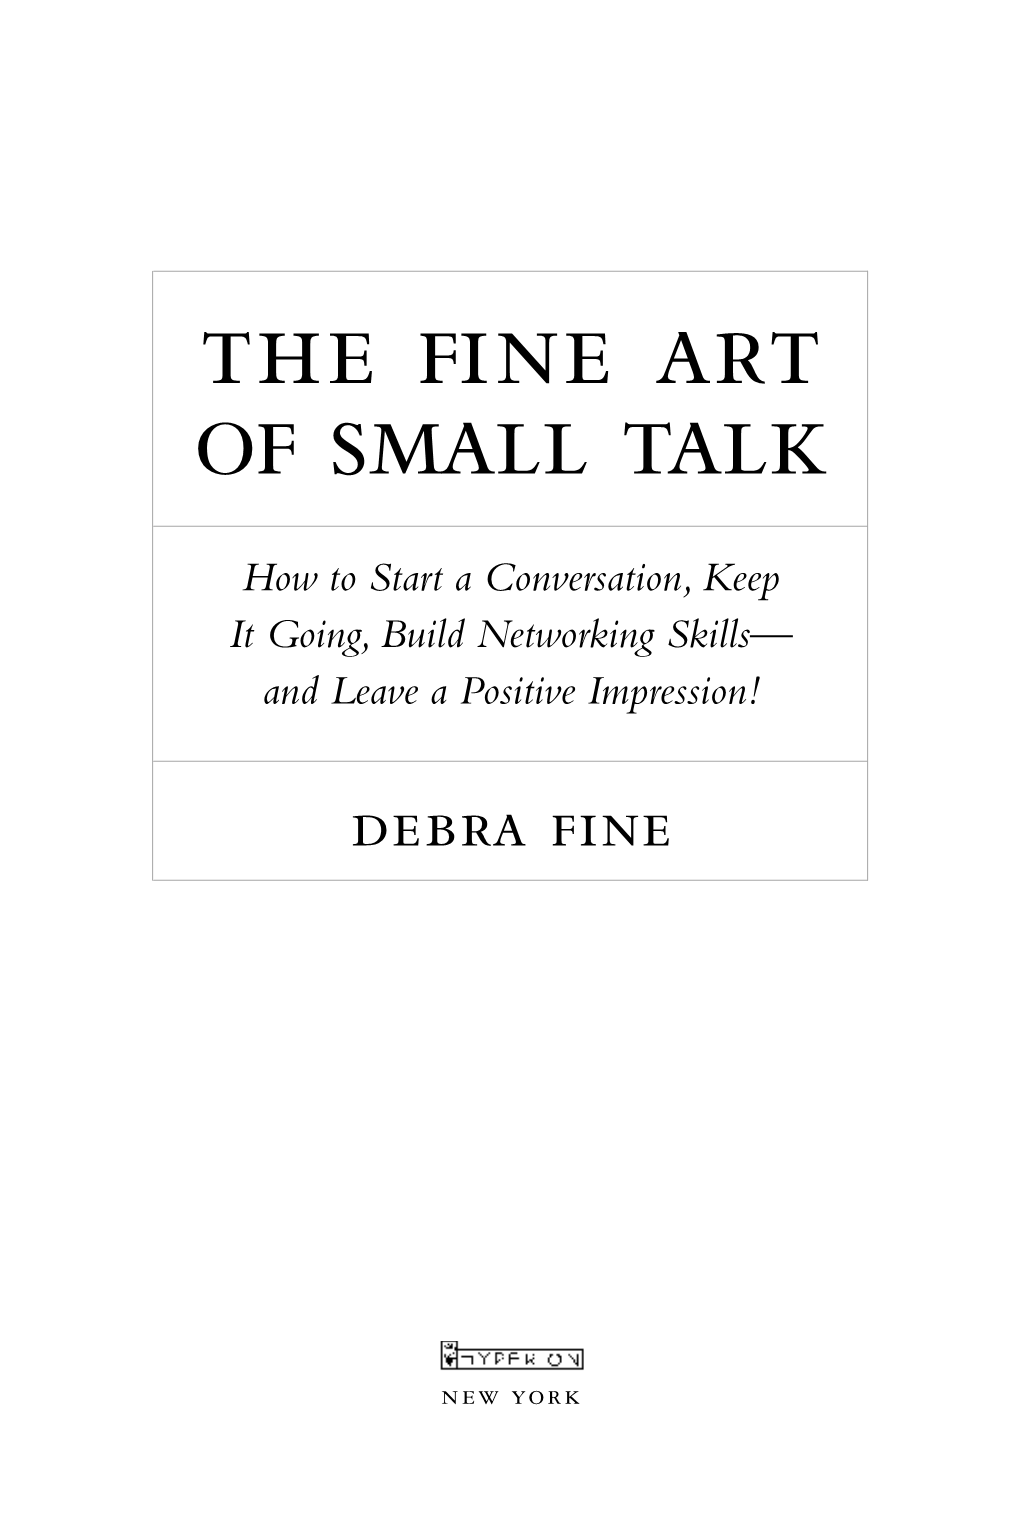 The Fine Art of Small Talk, I Had Been a Poor Communicator and a Timid Person for As Long As I Could Recall